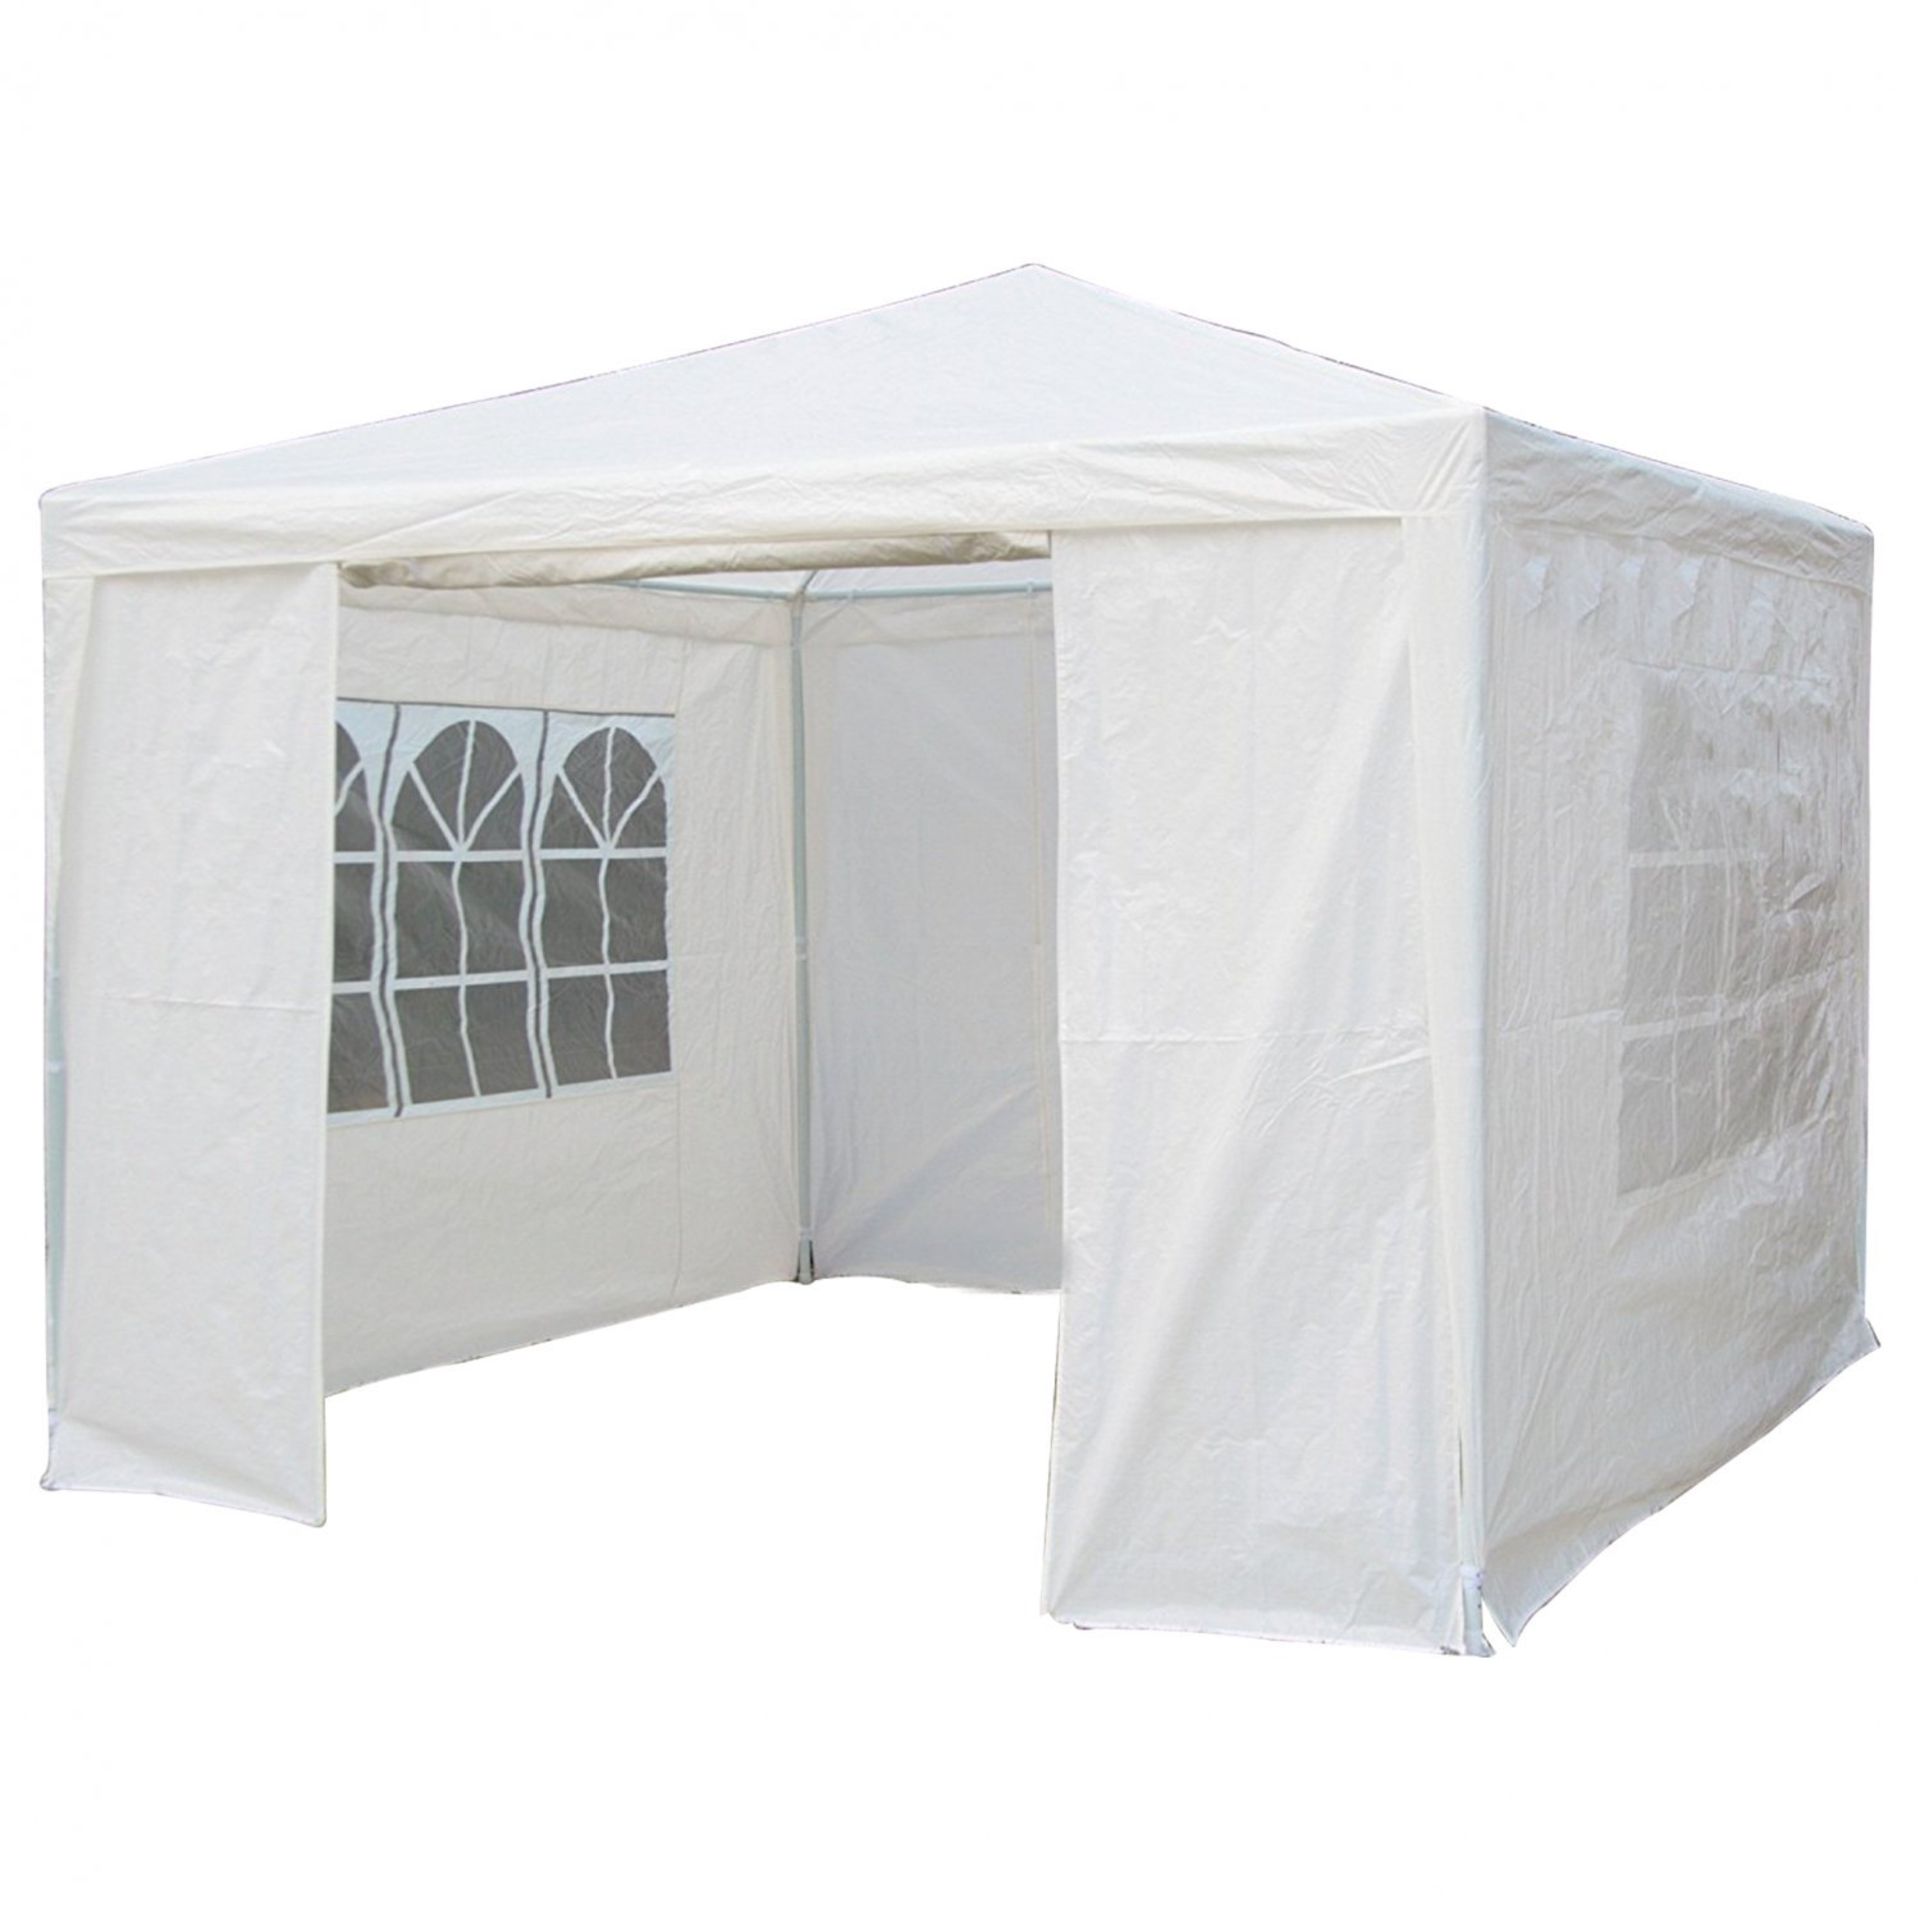 (EE513) 3m x 3m White Waterproof Garden Gazebo Marquee Awning Tent Zipped Door & 2 Removable W...